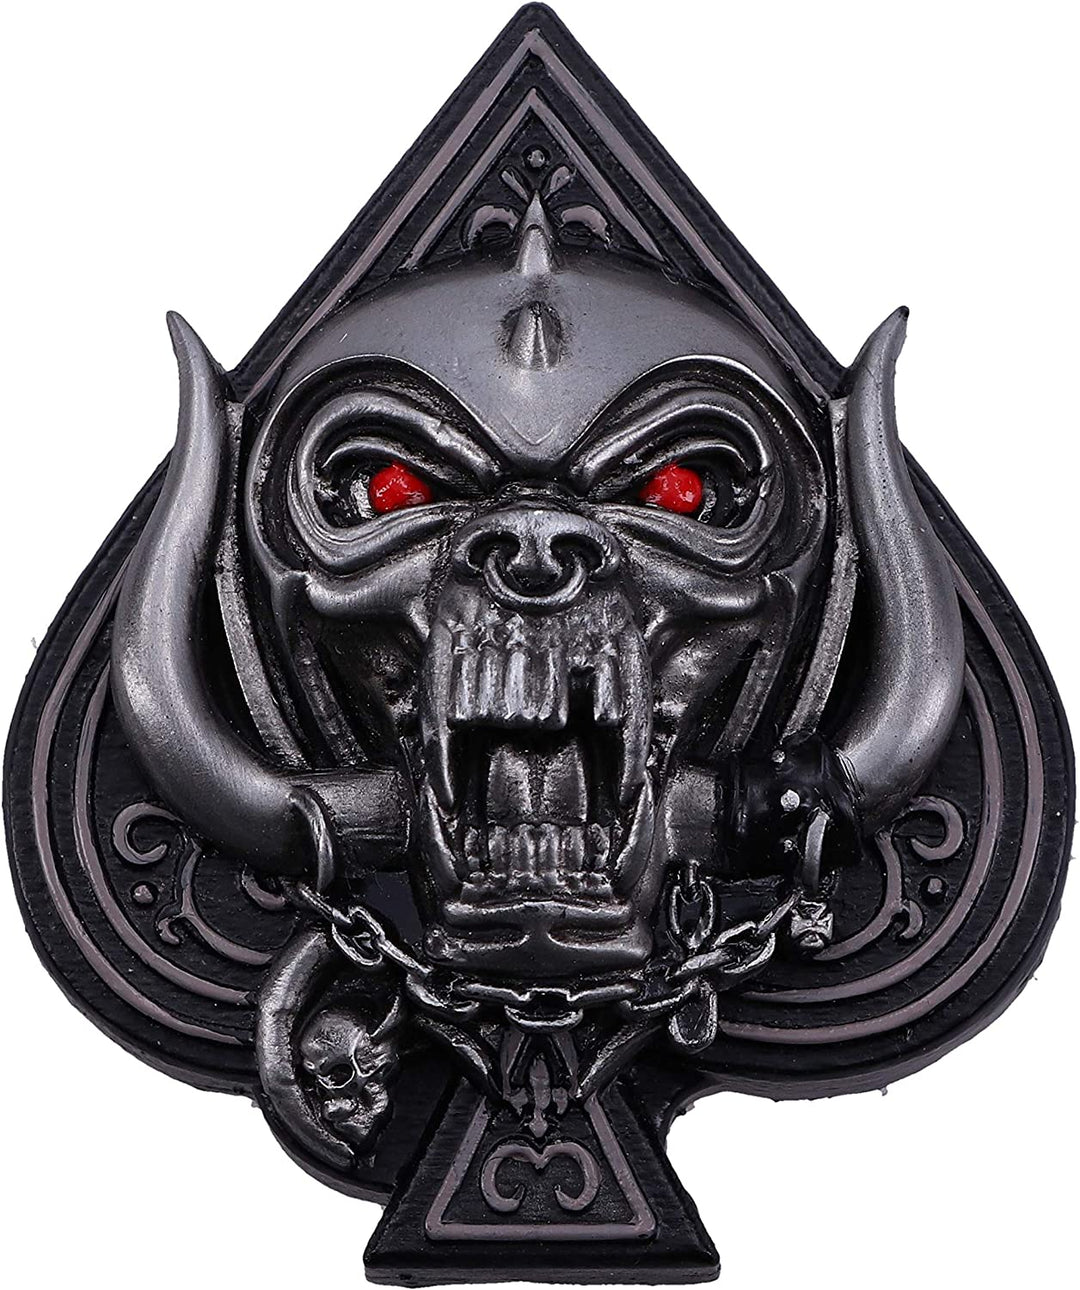 Nemesis Now Officially Licensed Motorhead Ace of Spades Warpig Snaggletooth Fridge Magnet, Silver, 6cm